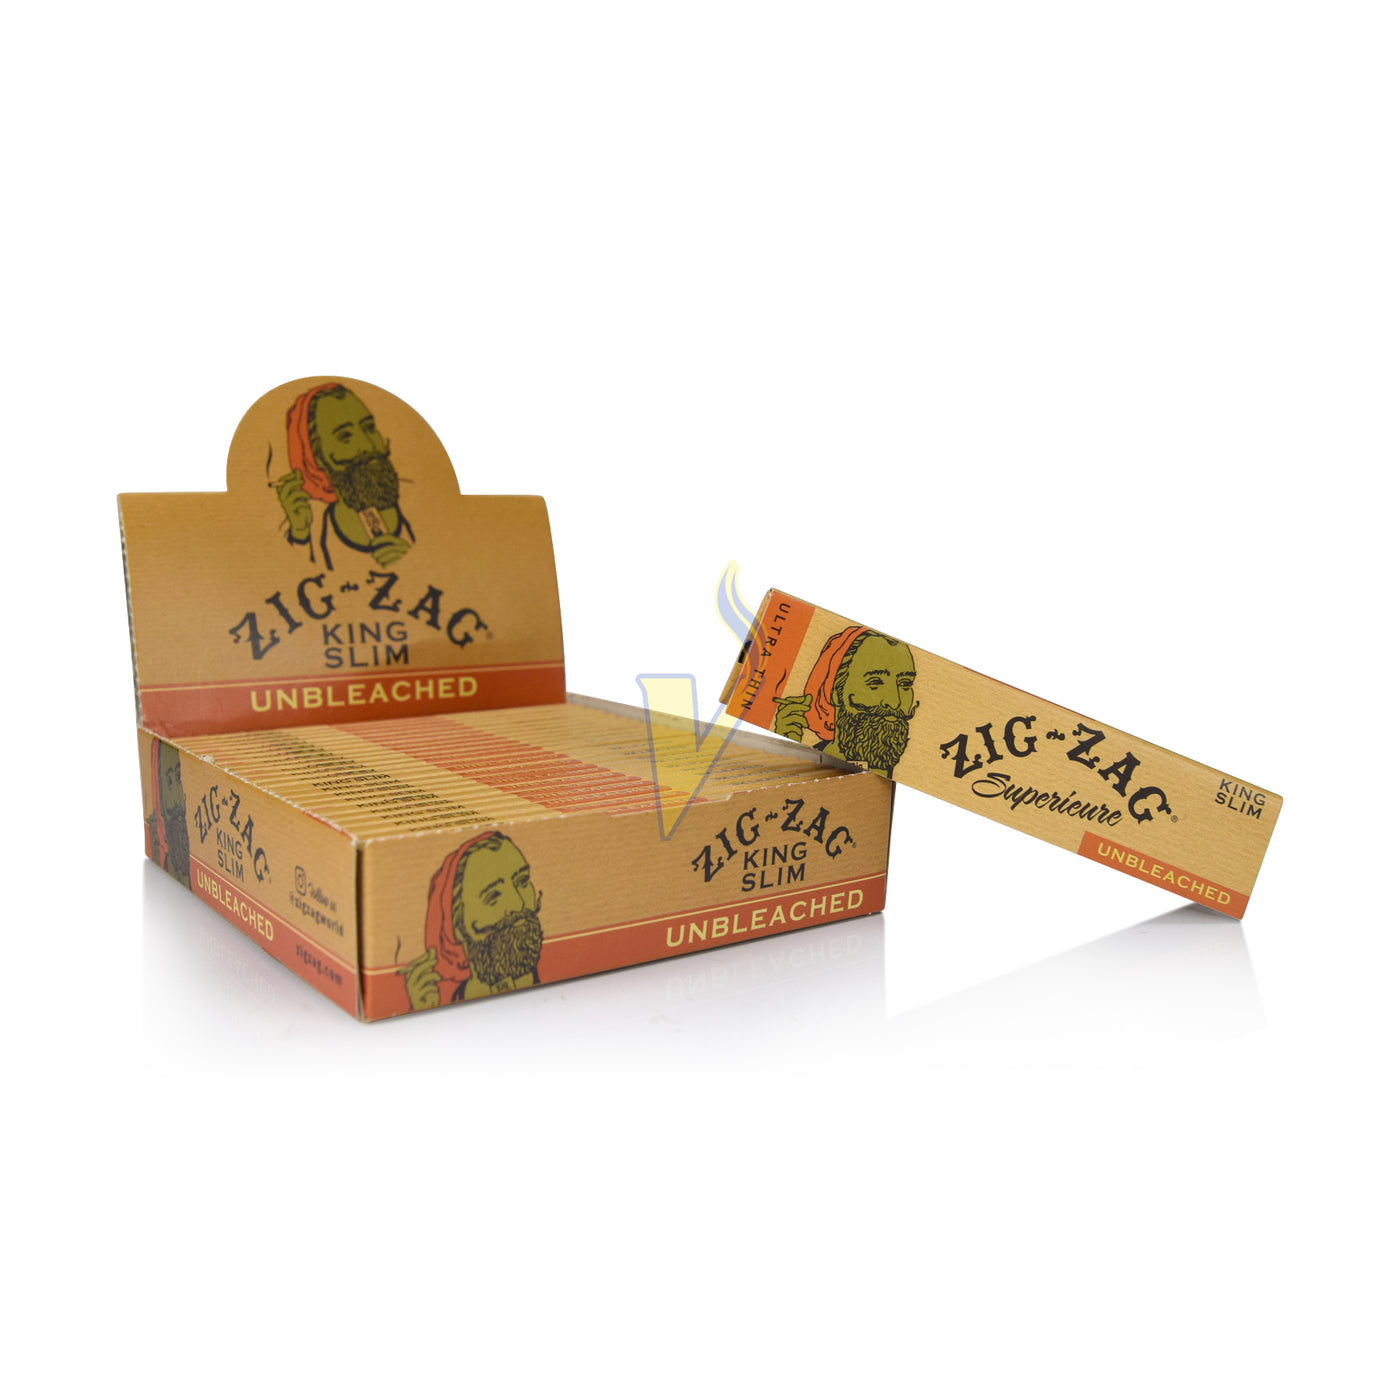 Zig Zag Unbleached King Size Papers